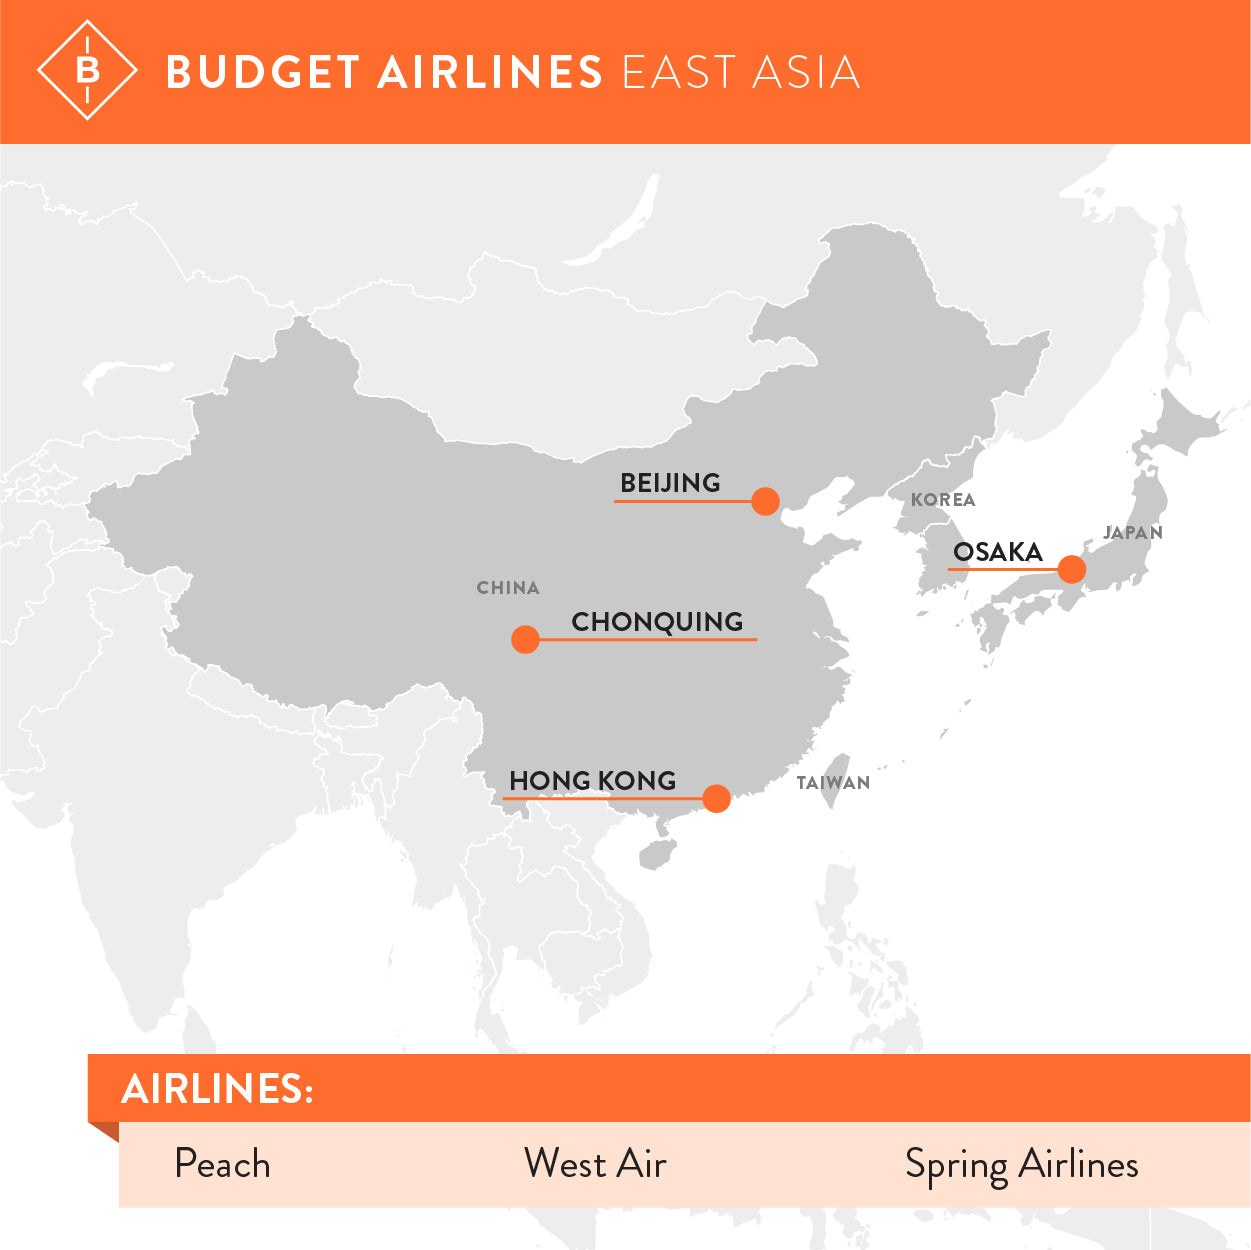 Options for low cost carriers in East Asia.